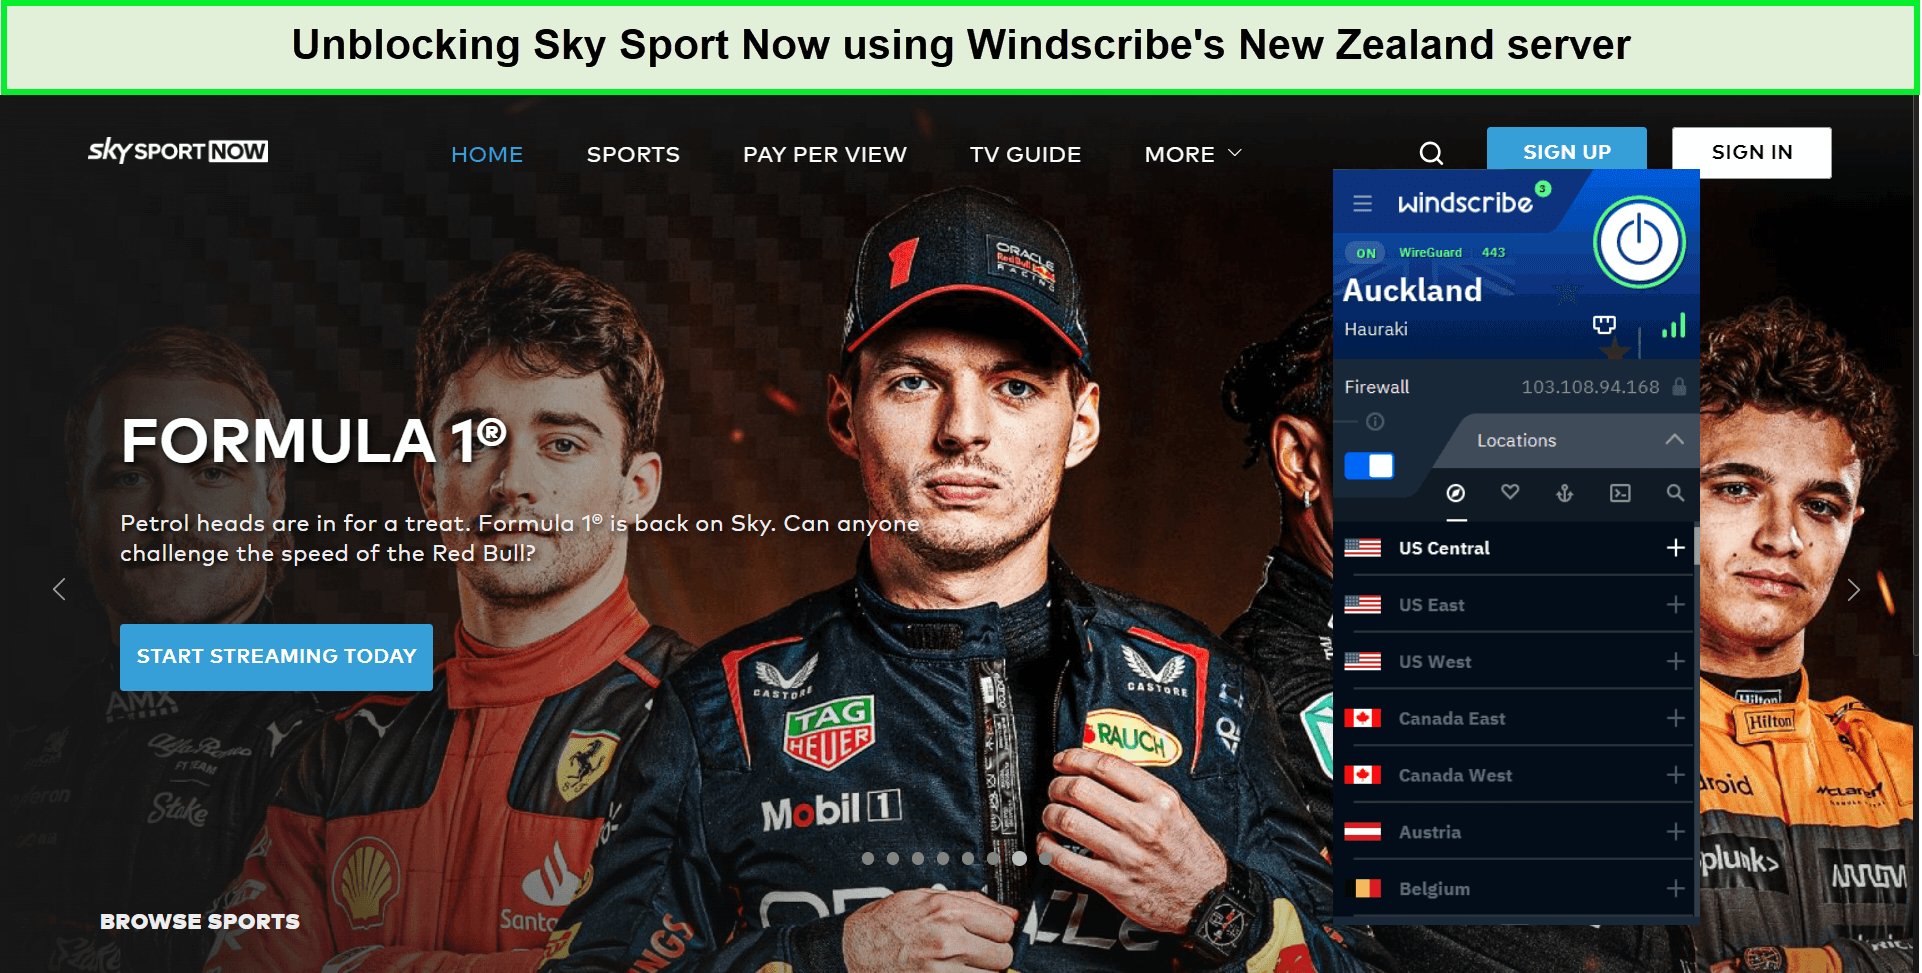 sky-sport-now-in-India-unblocked-by-windscribe